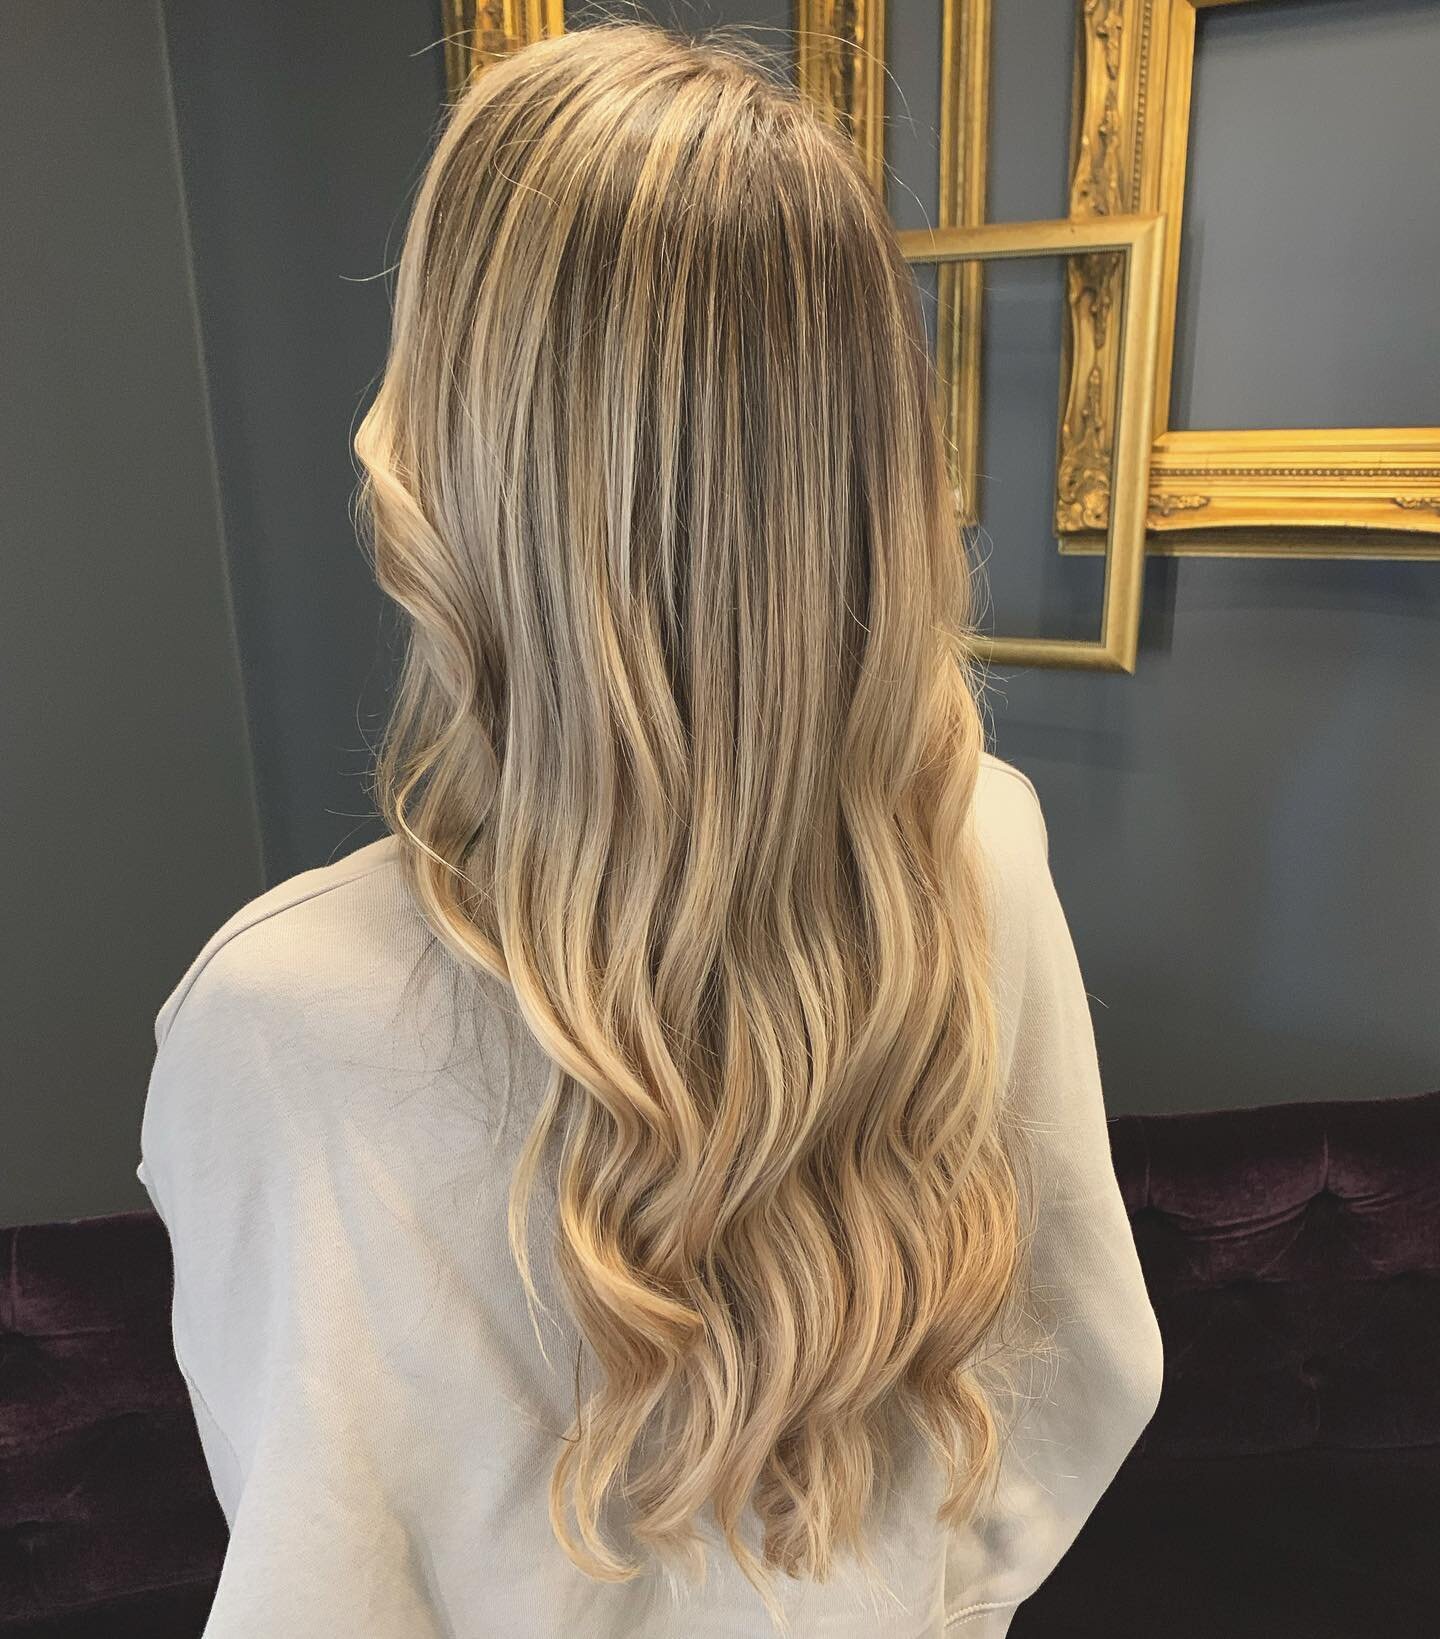 Officially feels like spring 💐
Don&rsquo;t forget to book your appointments for your fresh spring hair 😍
&bull;
&bull;
&bull;
#bostonhair #balayage #bestofboston #springhair #blonde #redkenshadeseq #babyblisspro